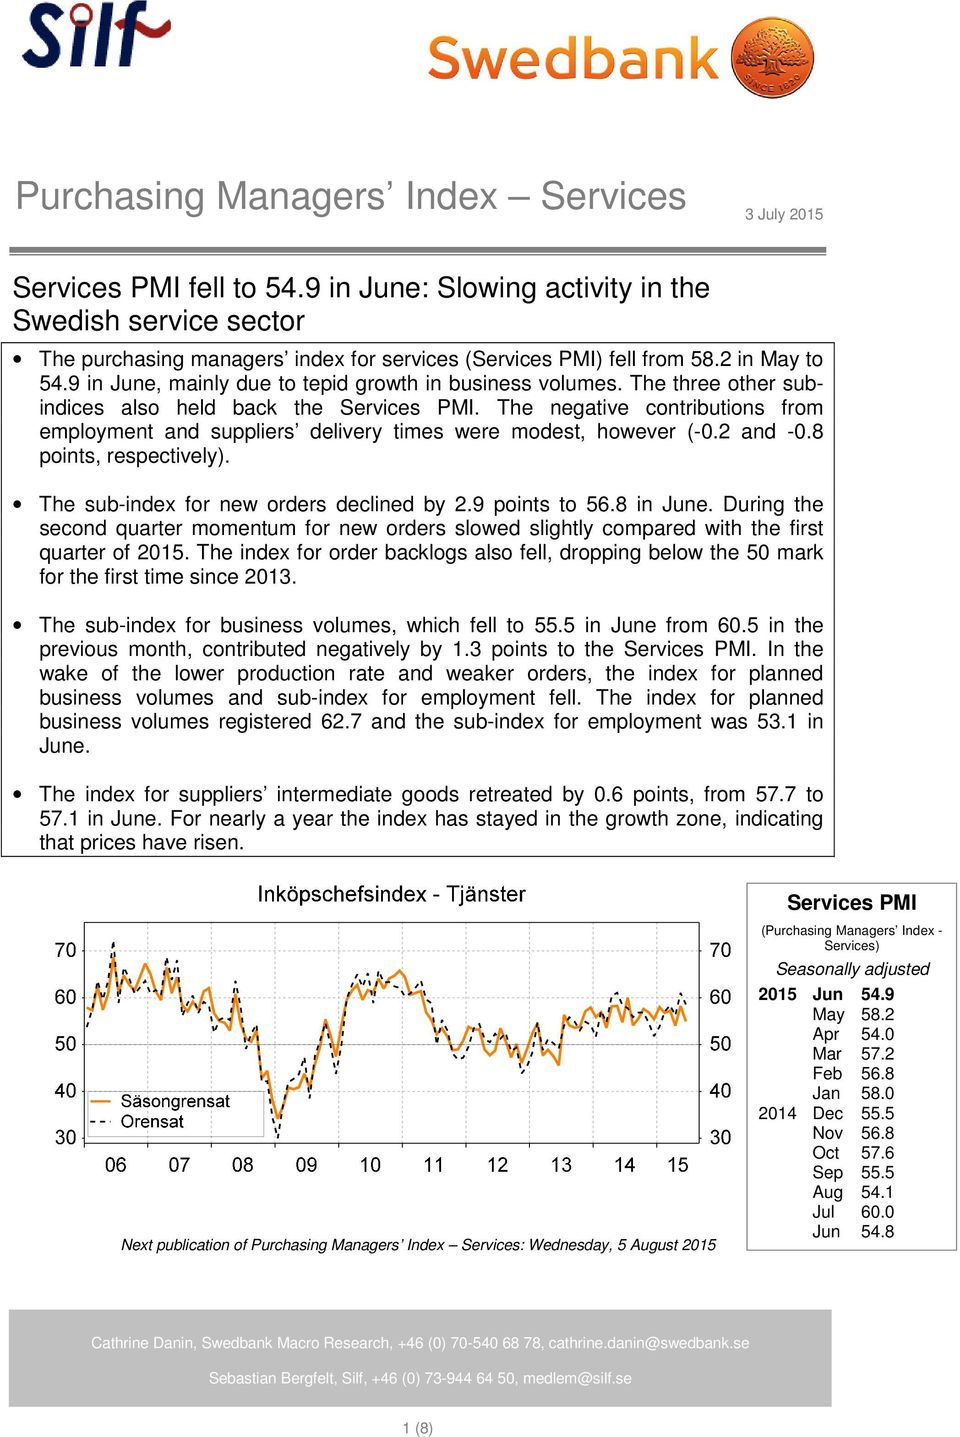 The negative contributions from employment and suppliers delivery times were modest, however (-0.2 and -0.8 points, respectively). The sub-index for new orders declined by 2.9 points to 56.8 in June.